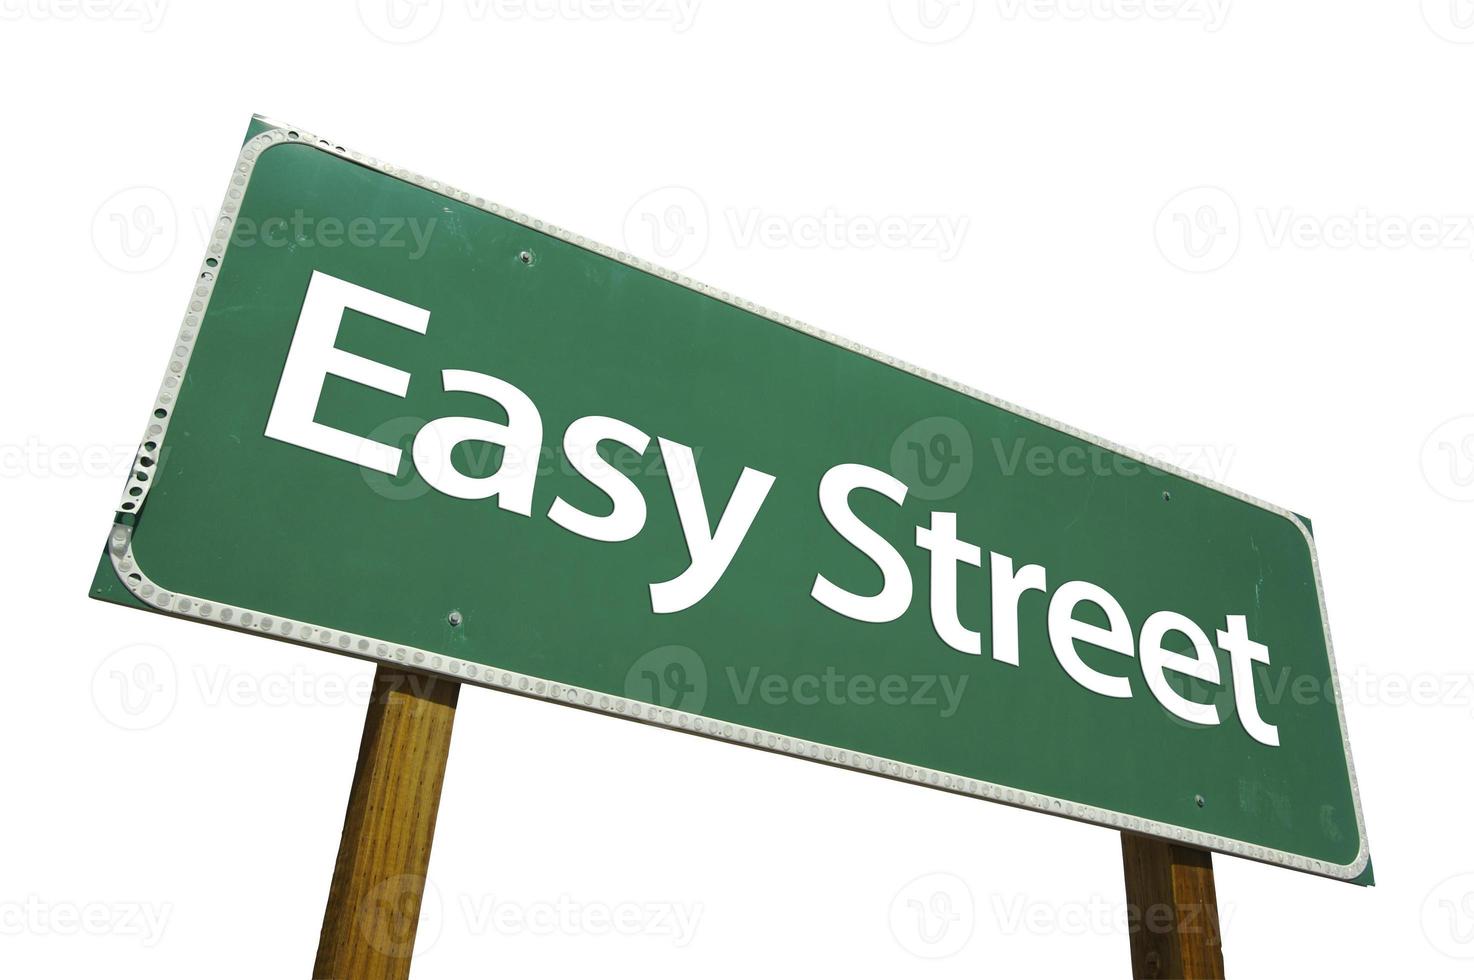 Easy Street Green Road Sign photo